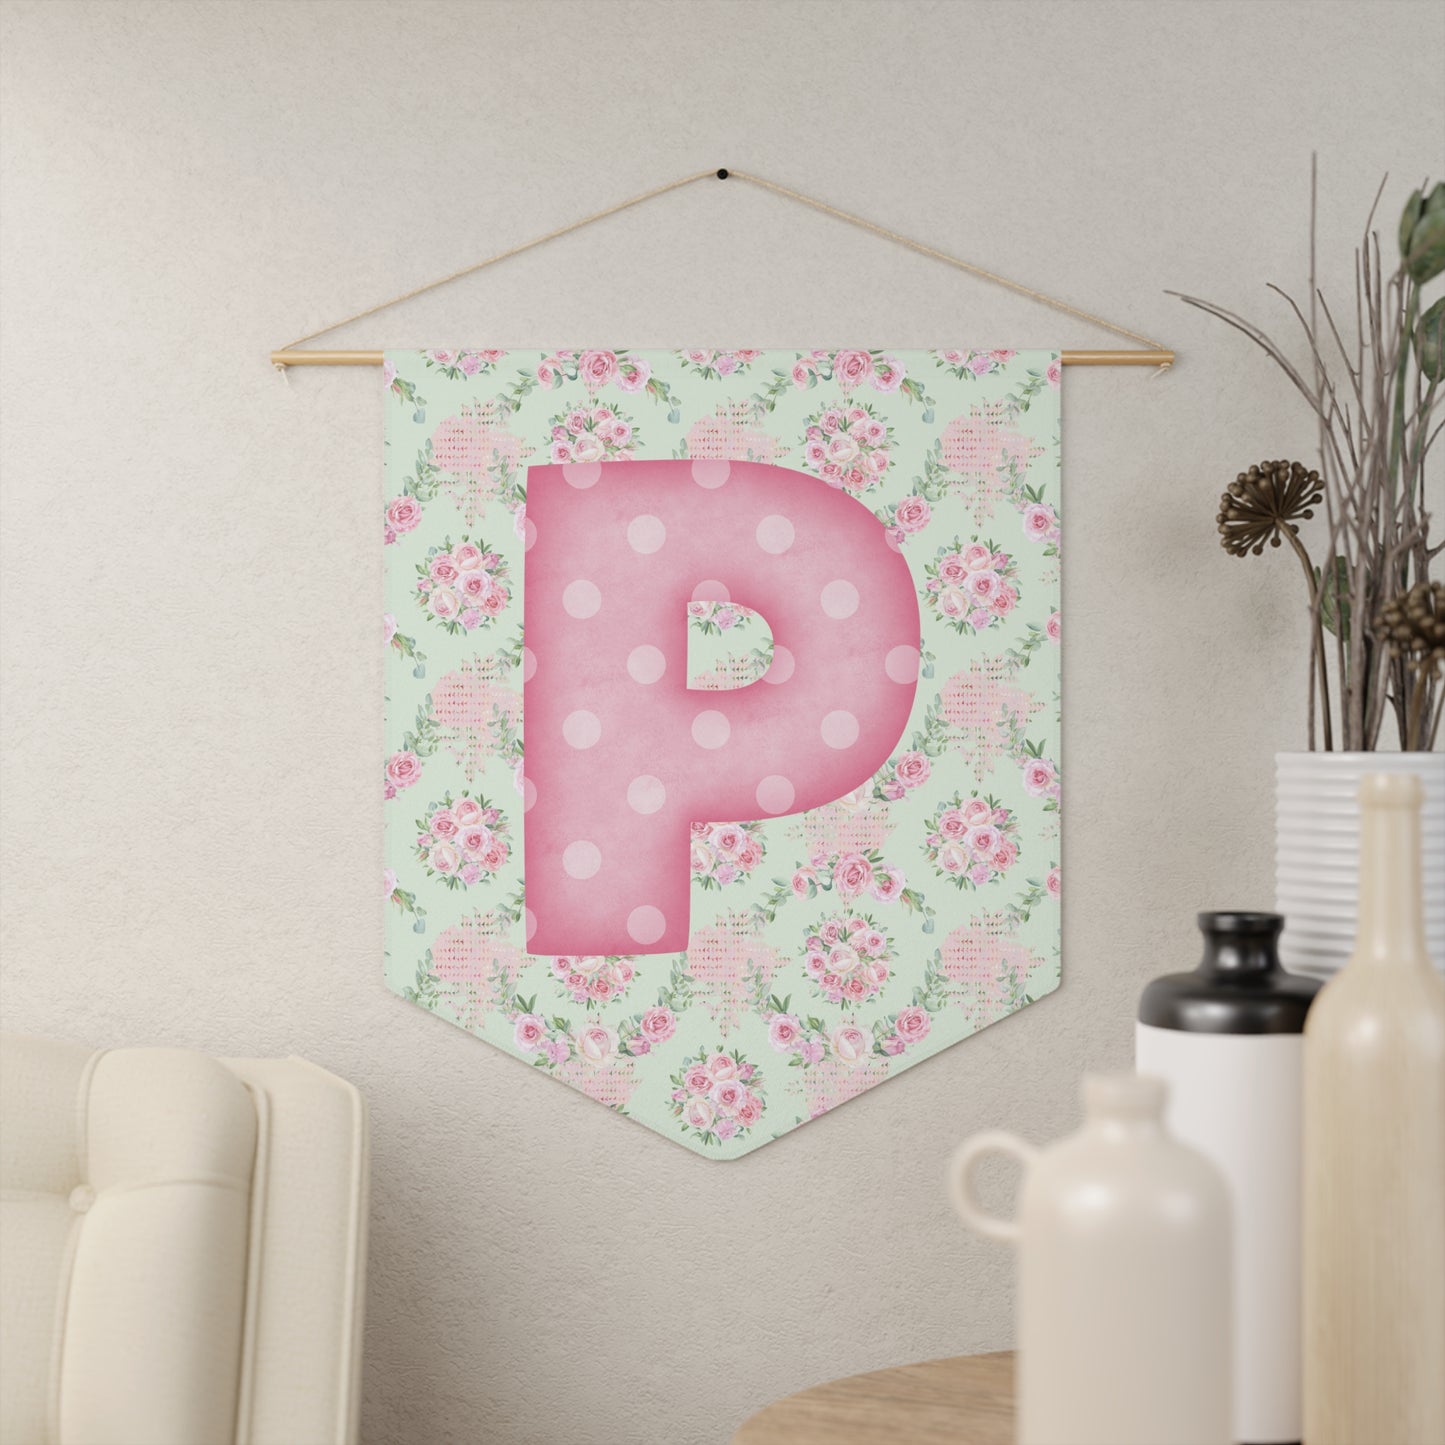 Coquette Pink & White Rose Personalized Initial or Monogram Pennant